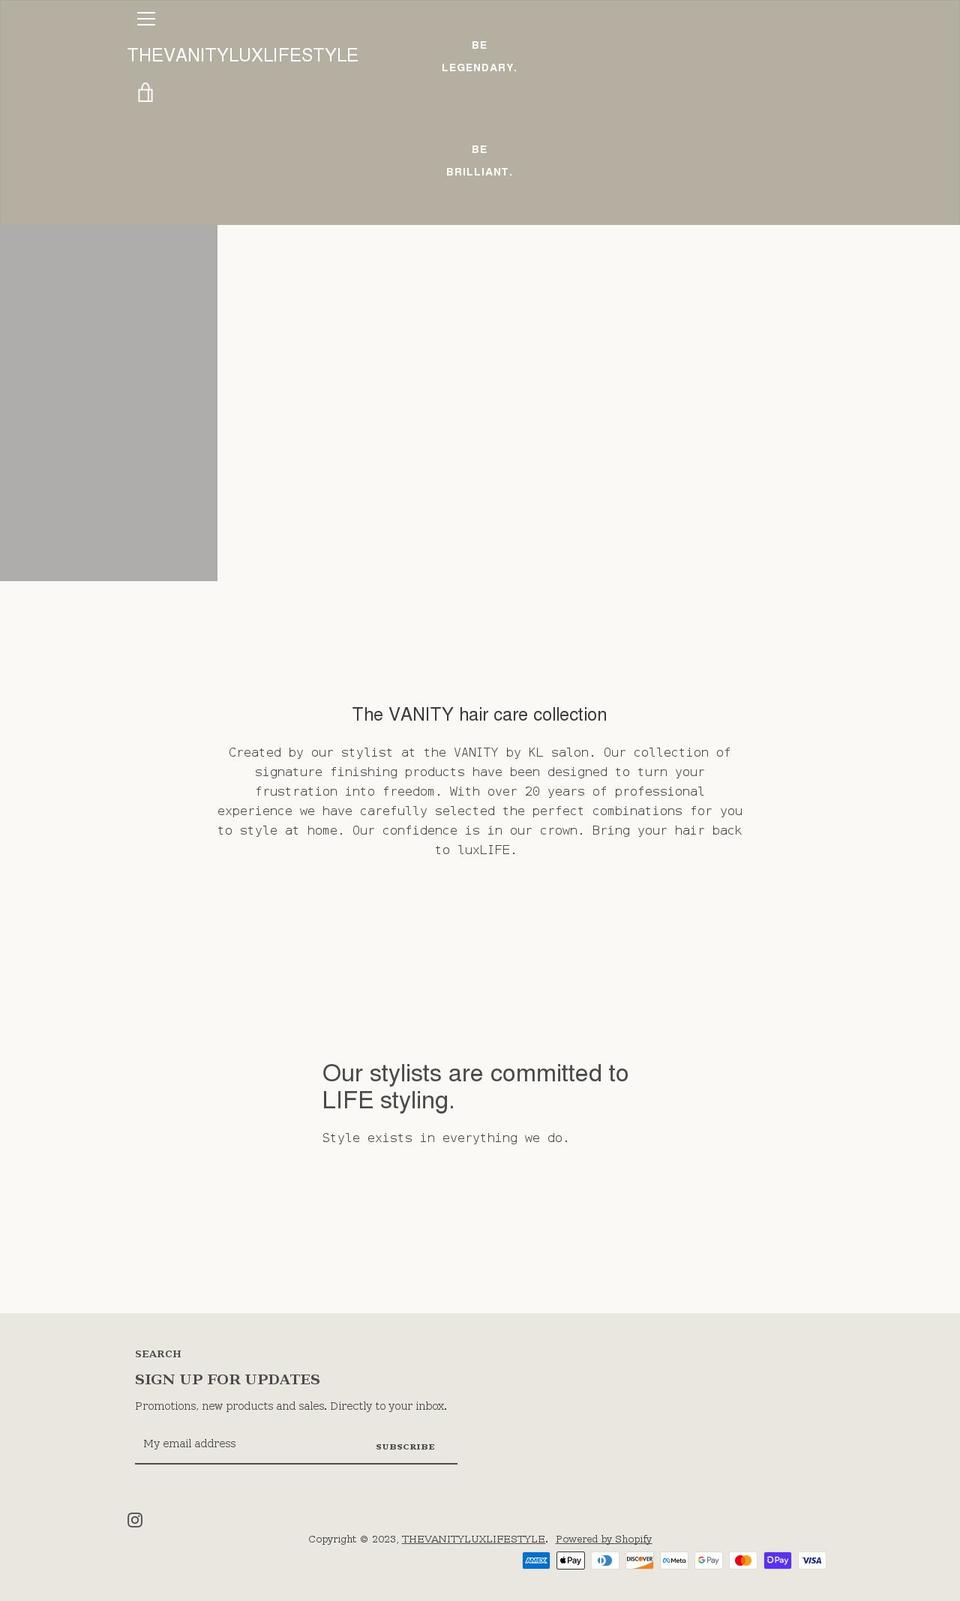 Narrative with Installments message Shopify theme site example thevanityluxlifestyle.com